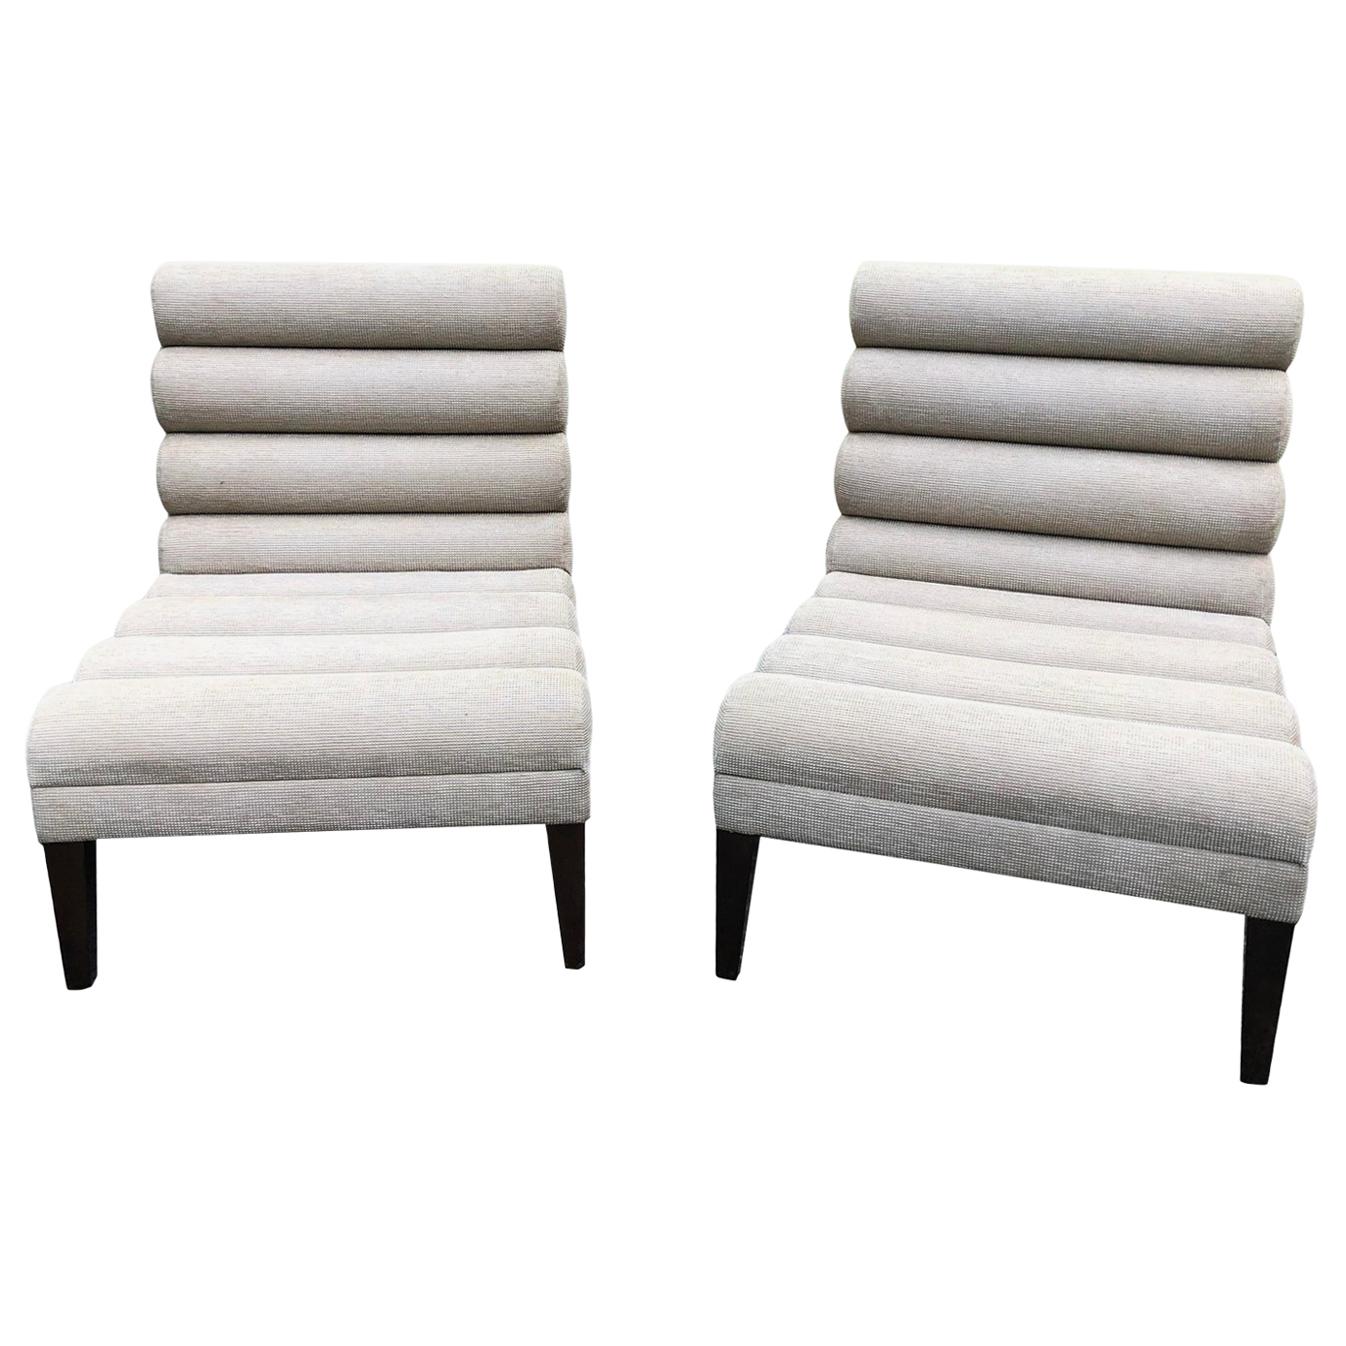 Super Chic Pair of Mid-Century Modern Channel Back Slipper Chairs